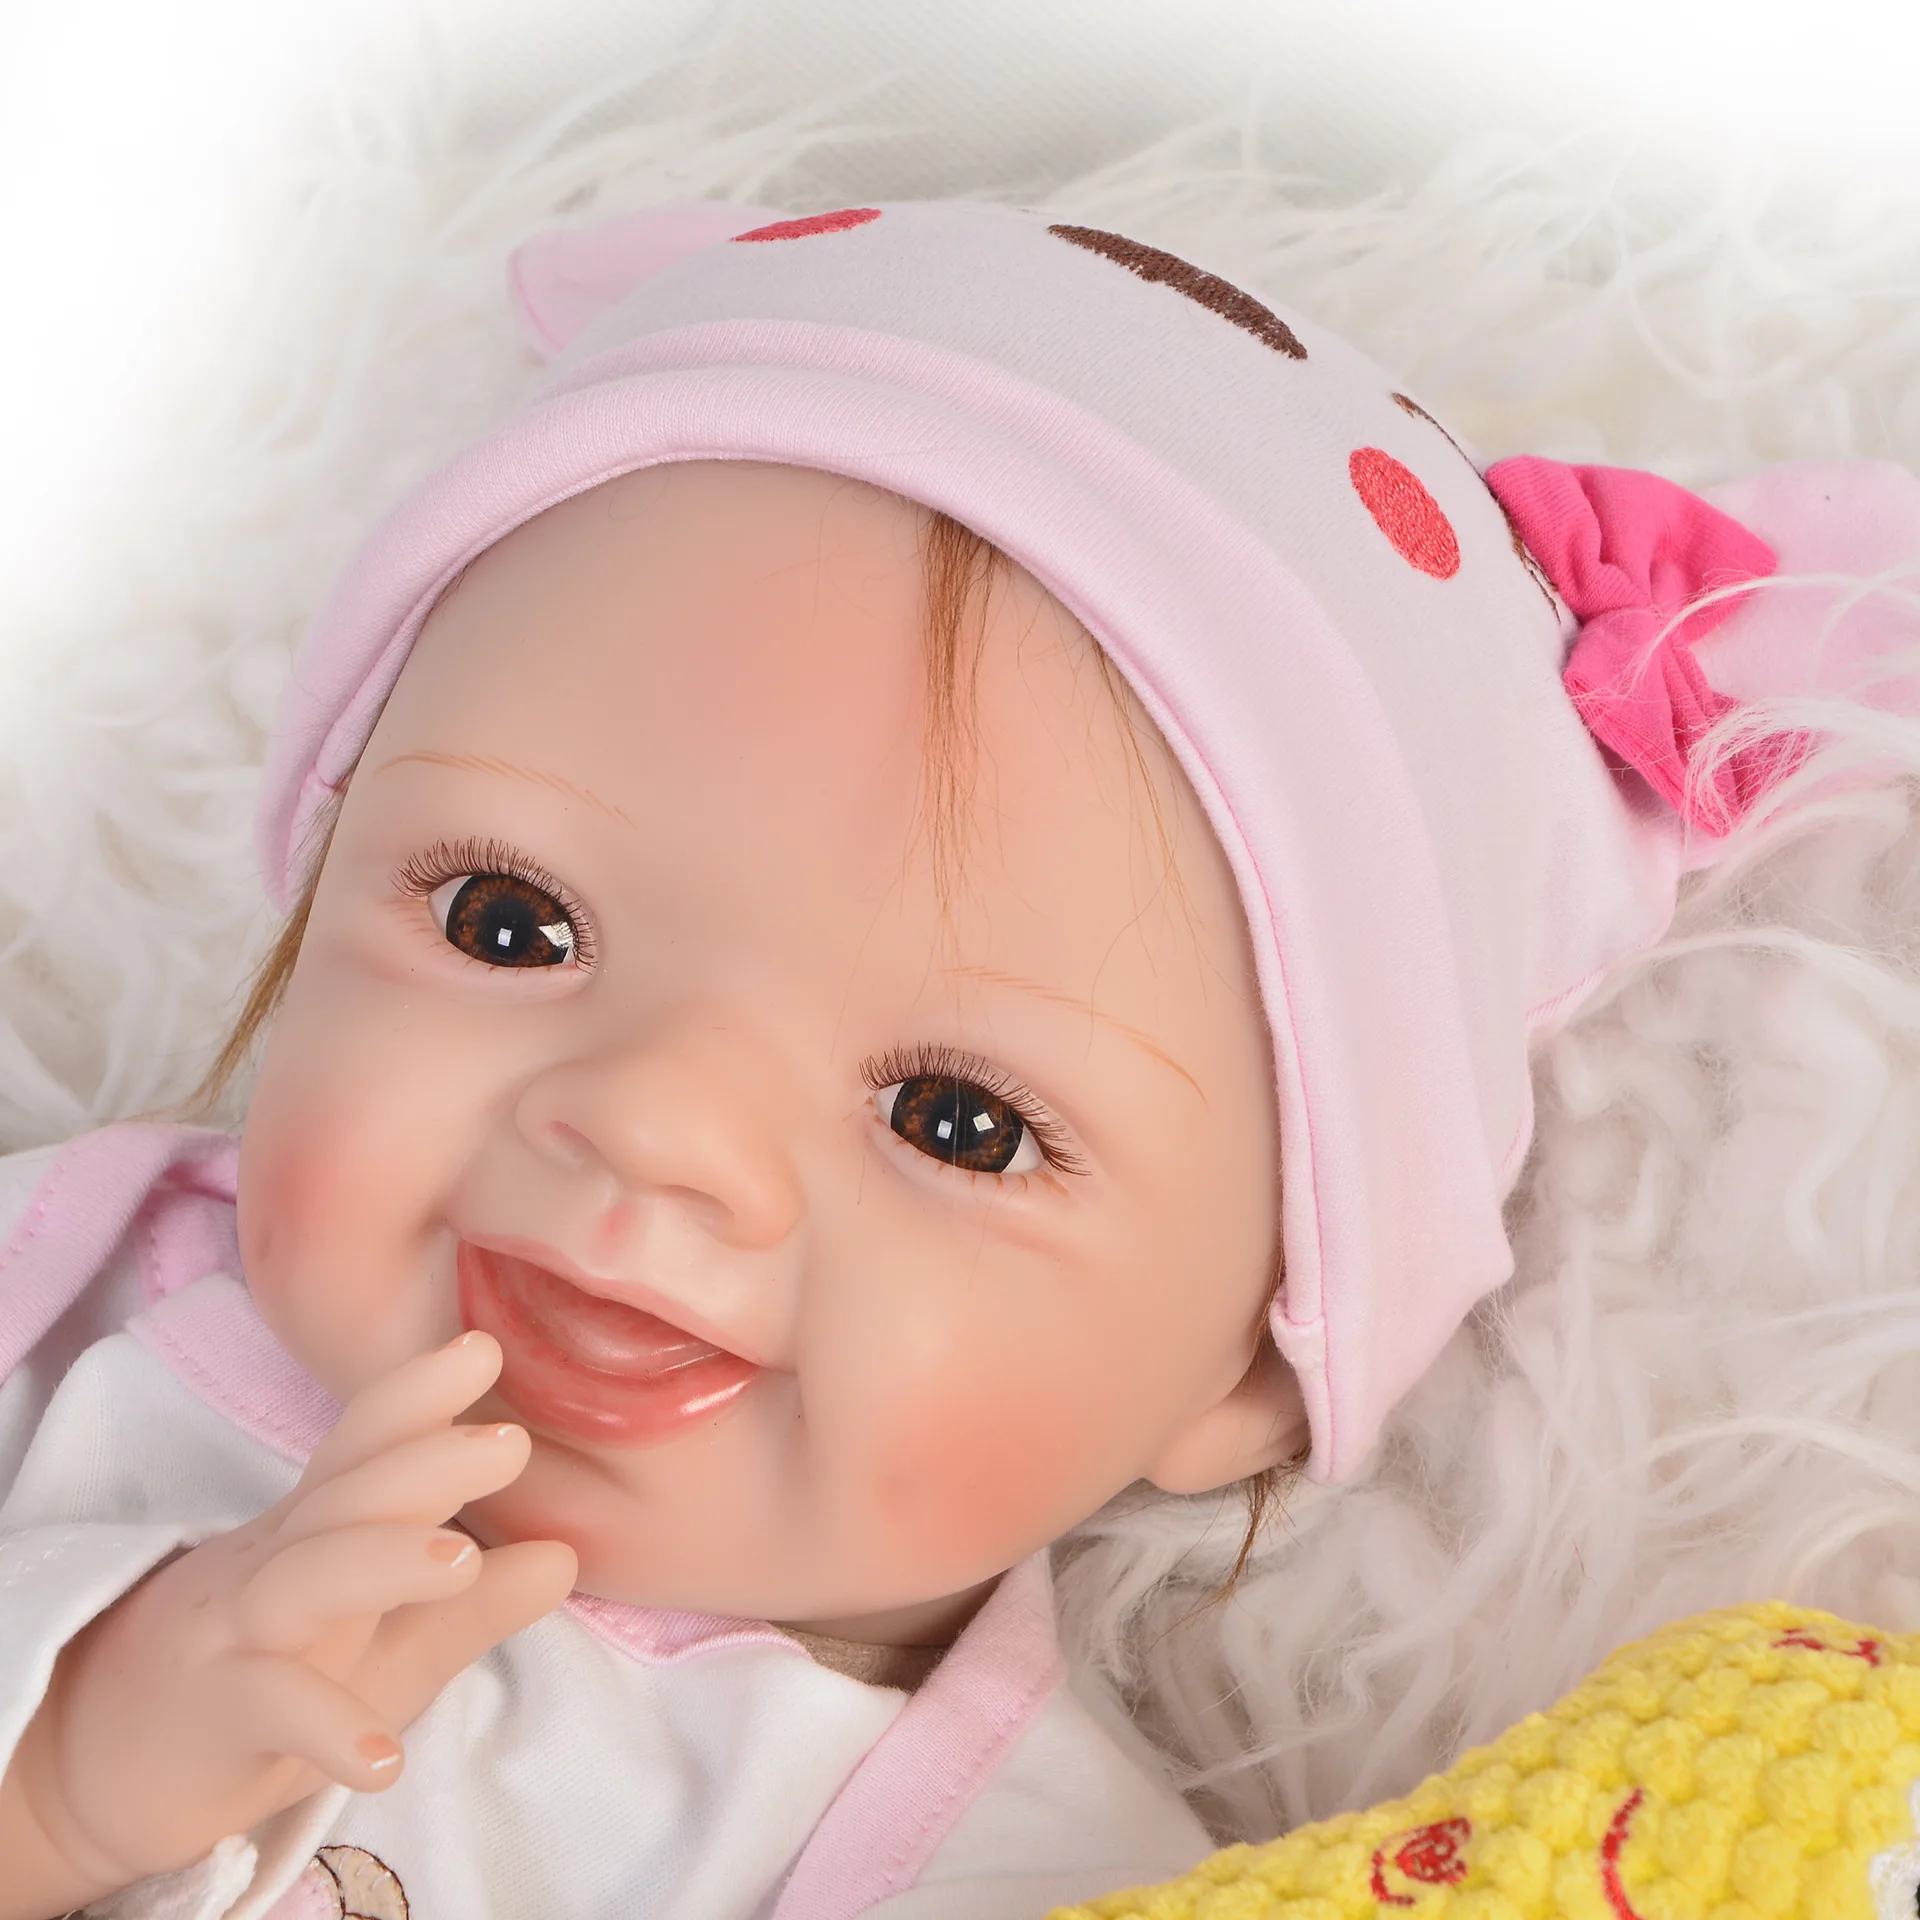  New Style 22-Inch Reborn Baby Doll Cloth Body Model Infant Can Be Mixed Batch